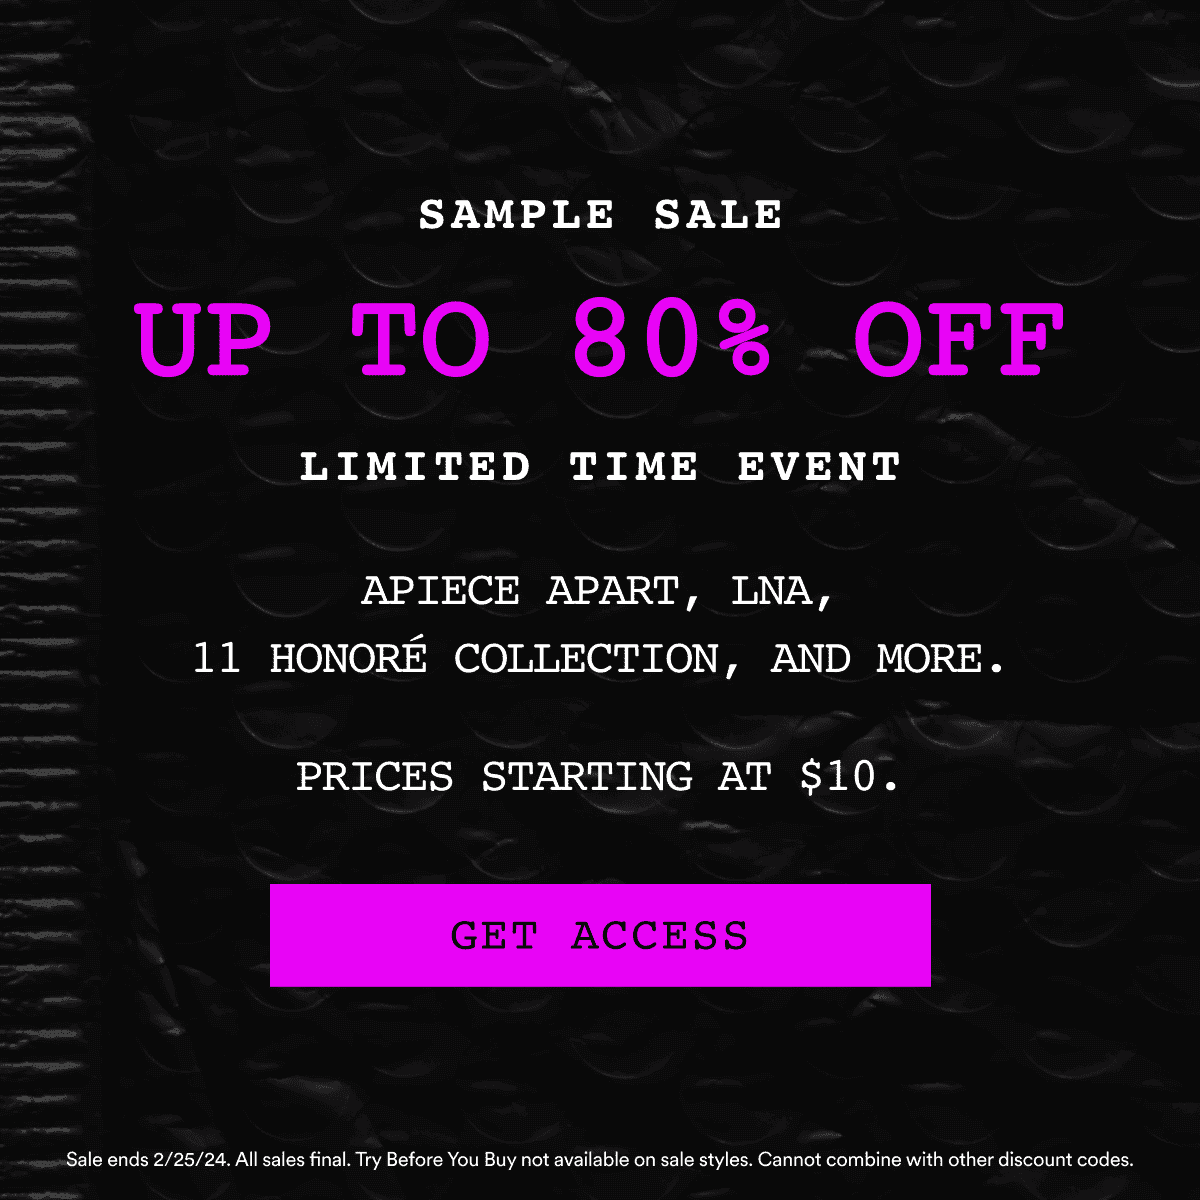 Sample Sale. UP TO 80% OFF. LIMITED TIME EVENT. Apiece Apart, LNA, 11 Honoré Collection, and more. Prices starting at \\$10. Get Access